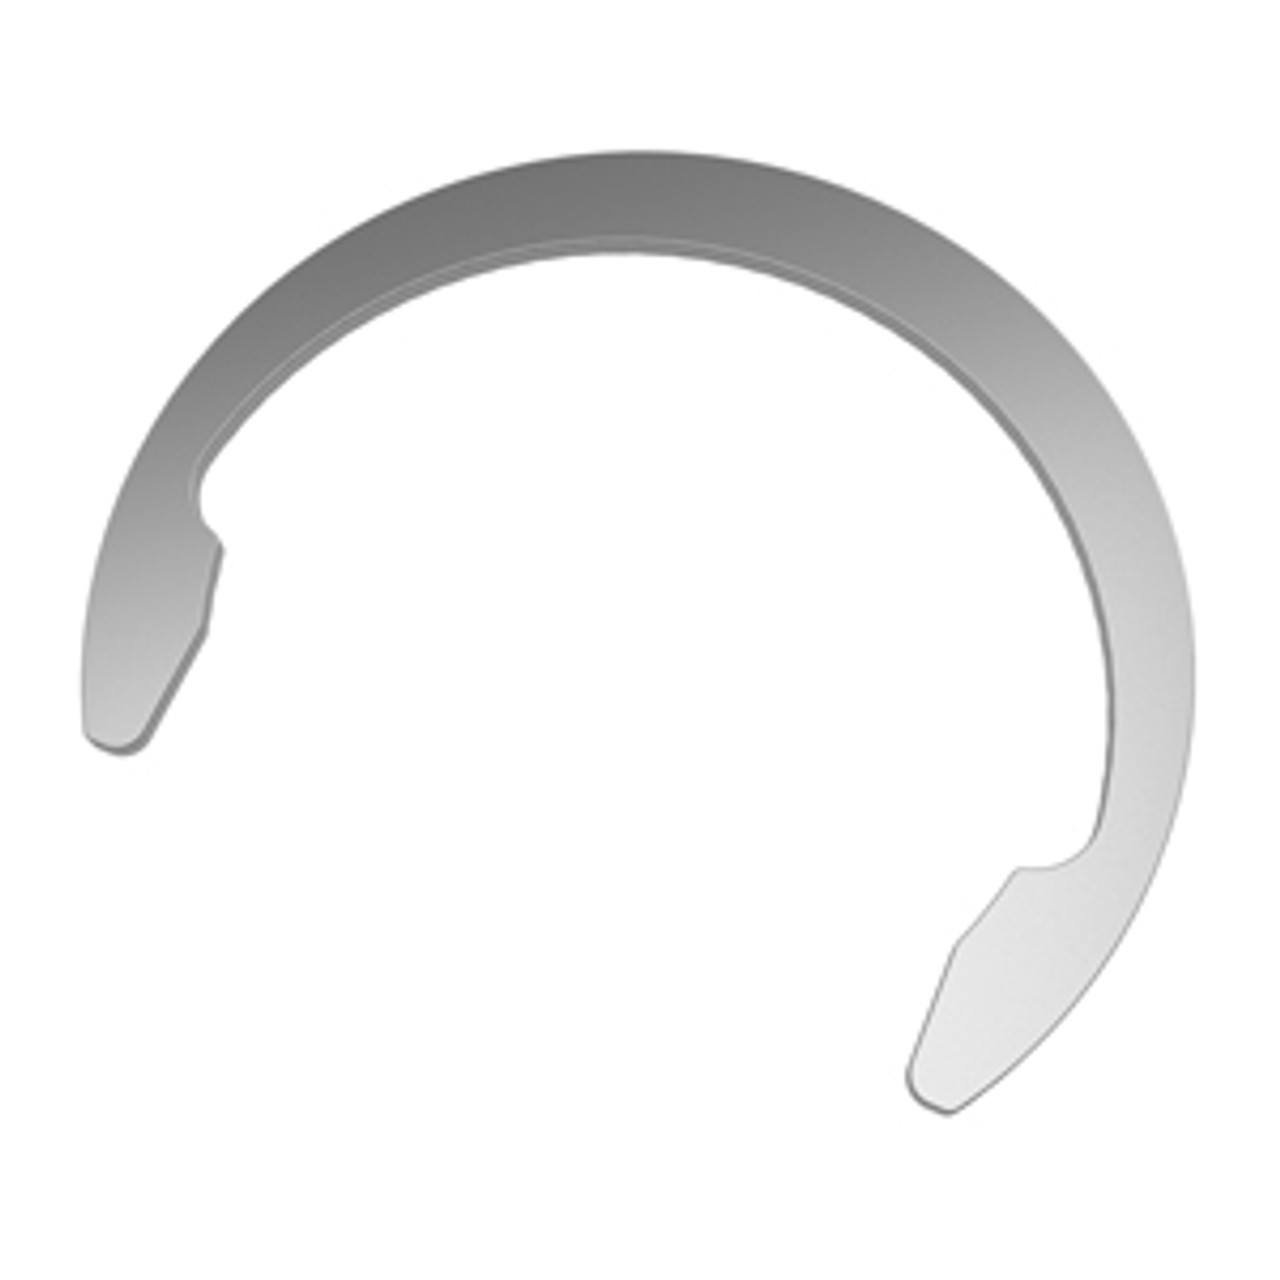 External Metric Phosphated Low Profile Crescent Retaining Ring  DC-050-PA